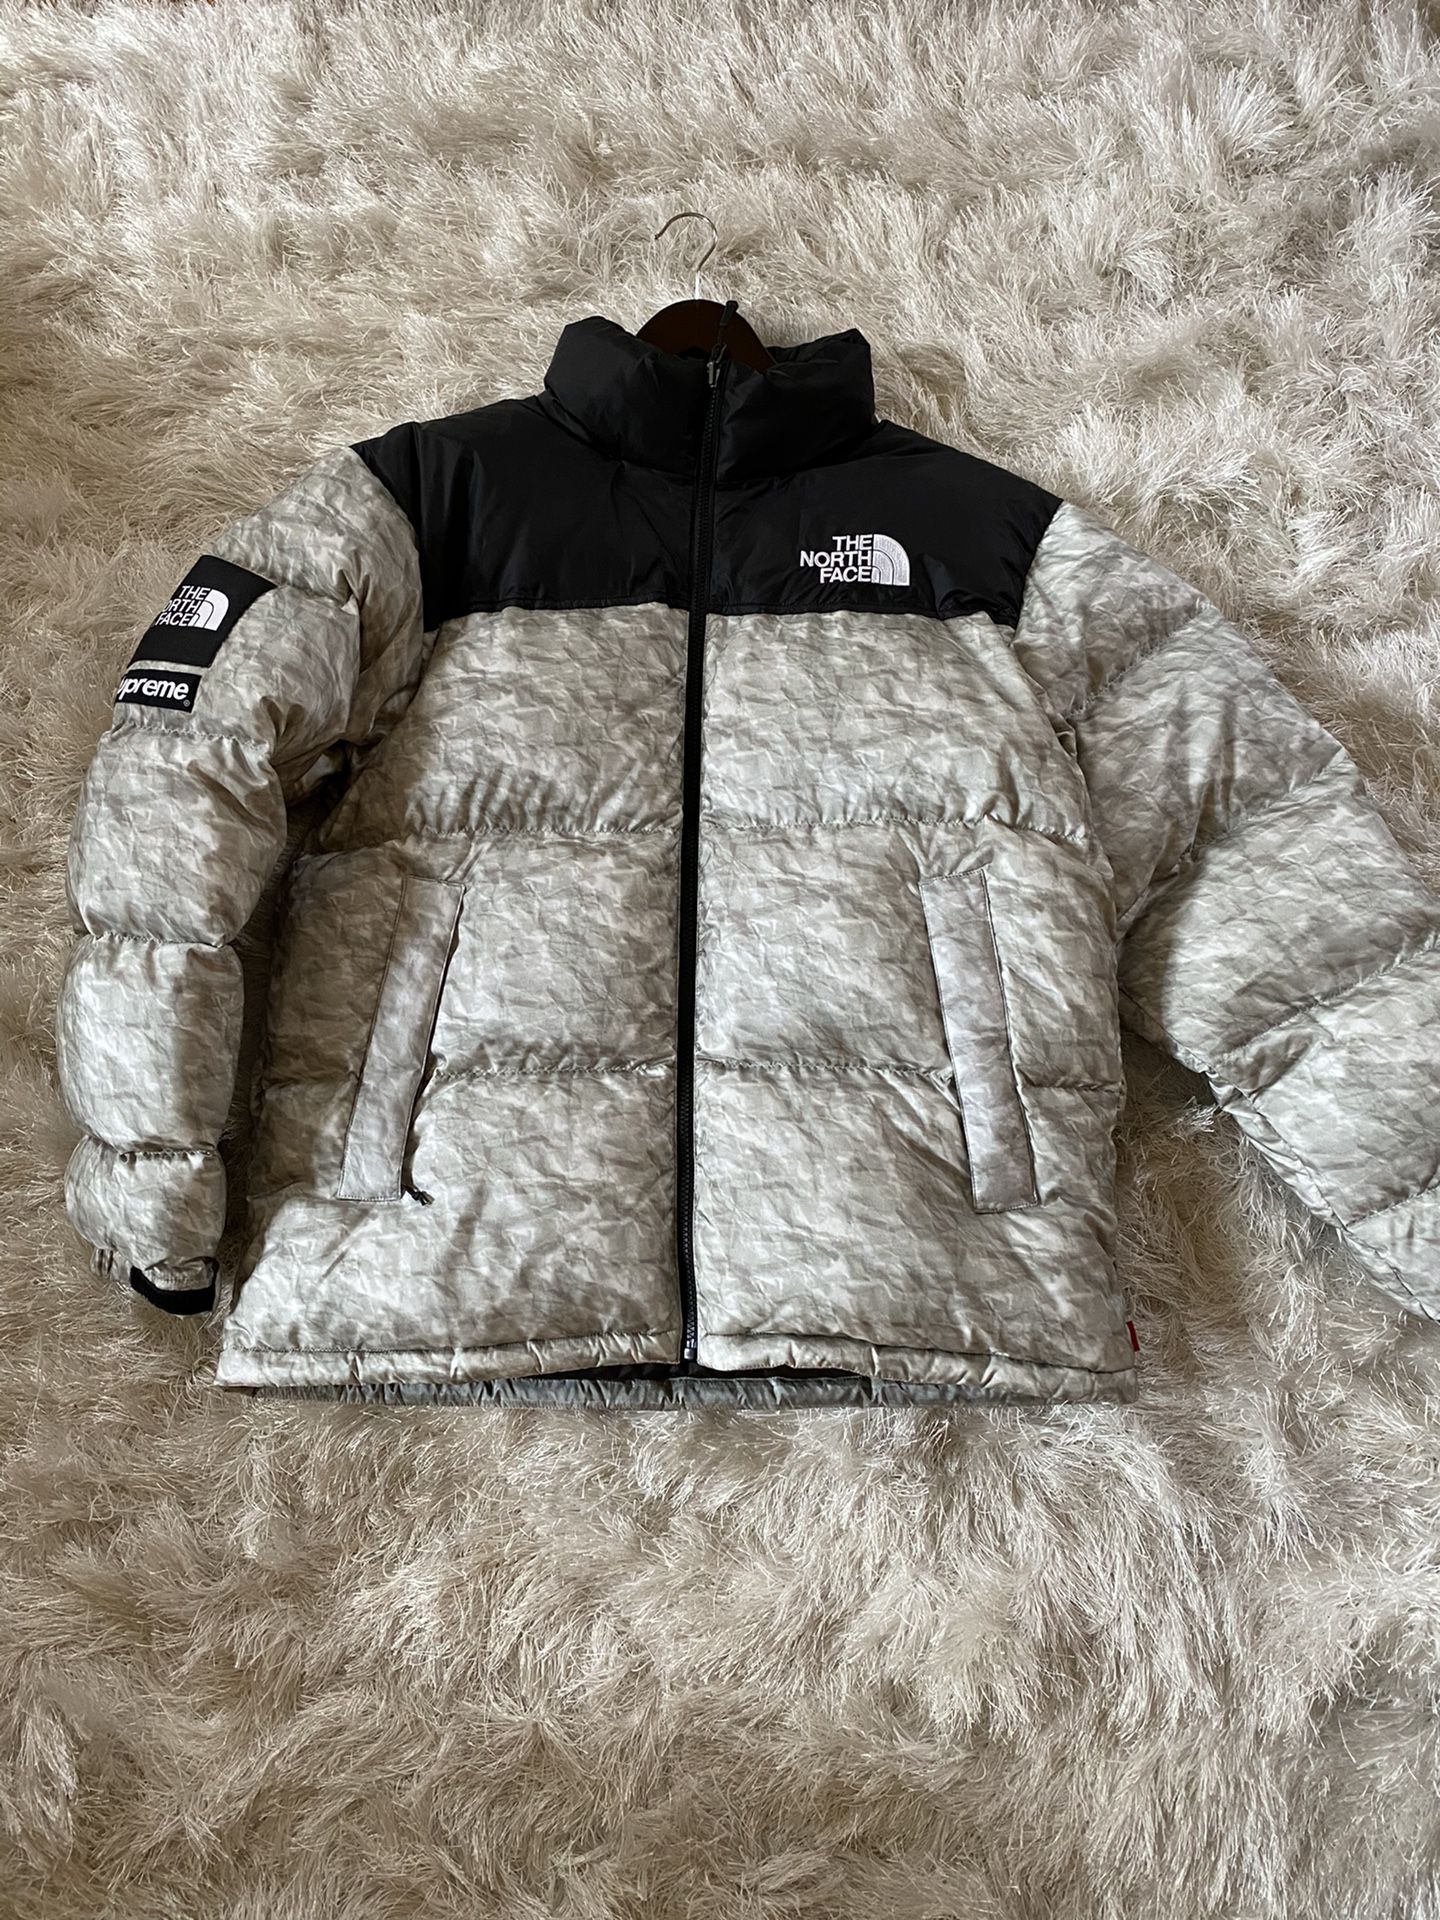 Supreme x TNF the north face Paper Nupste Jacket size large